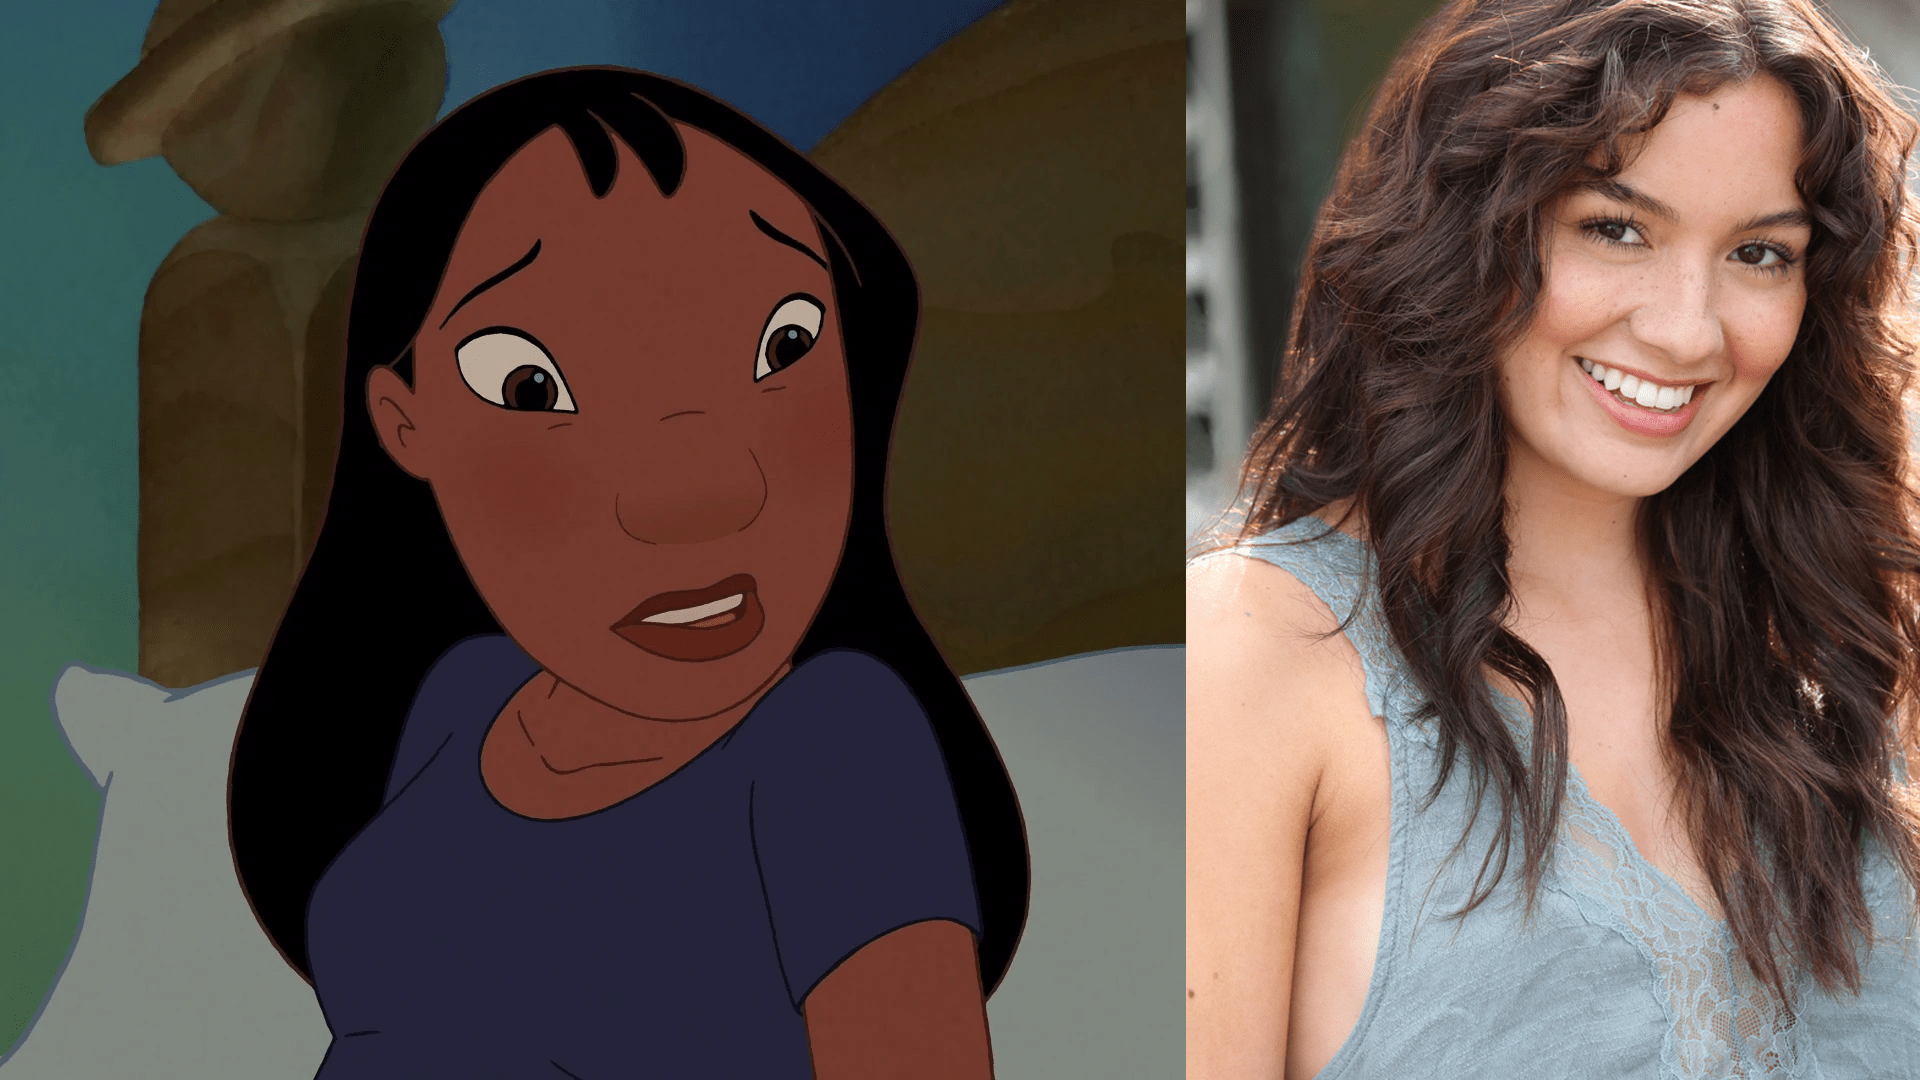 Disney's 'Lilo & Stitch' Live Action Cast and Characters